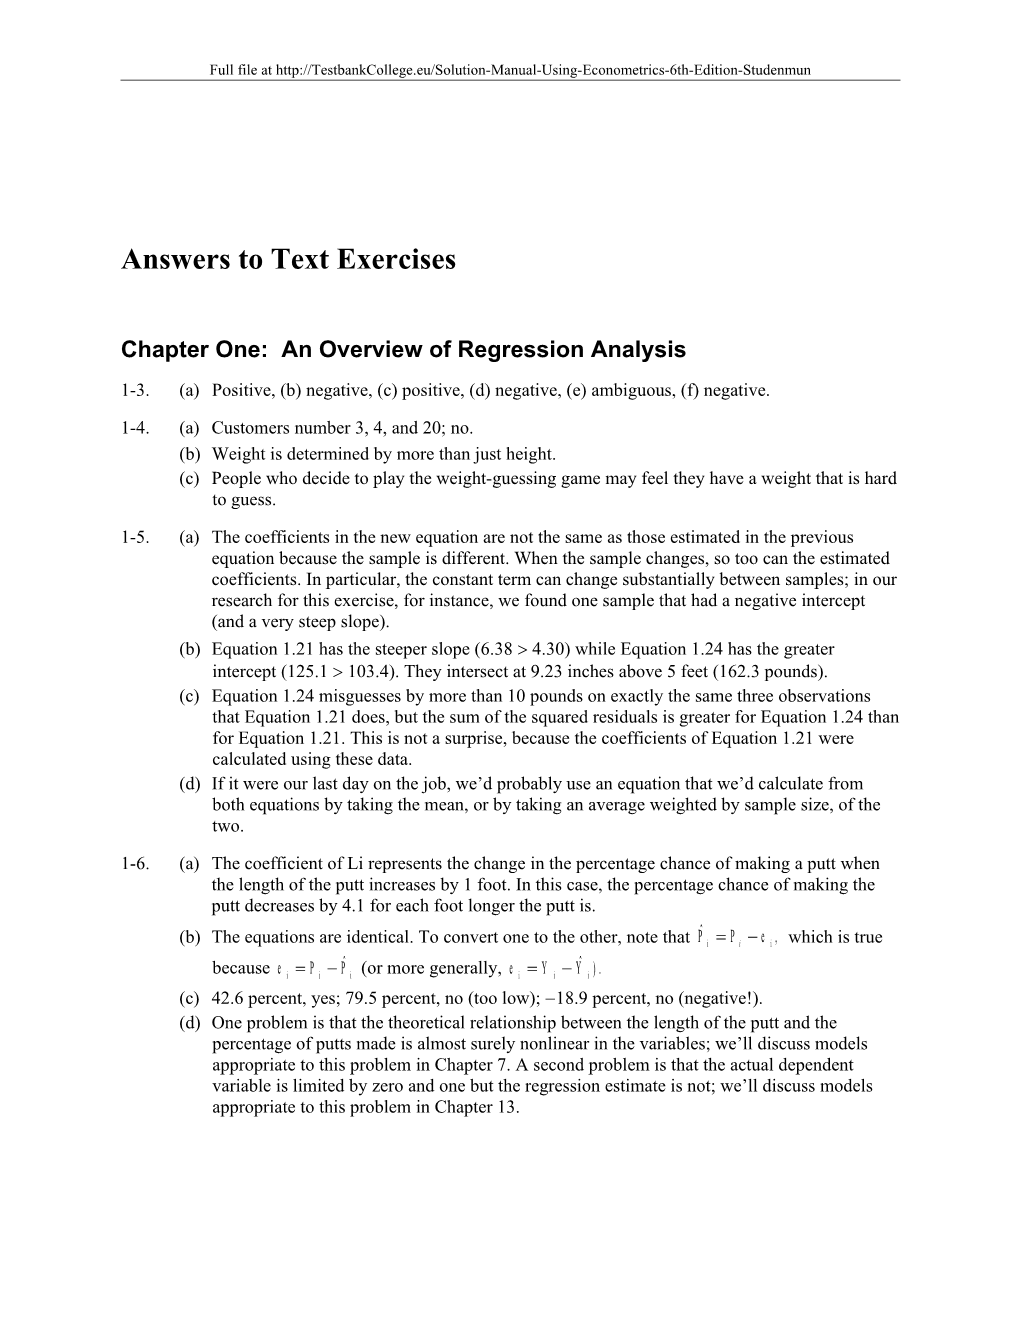 Chapter One: an Overview of Regression Analysis